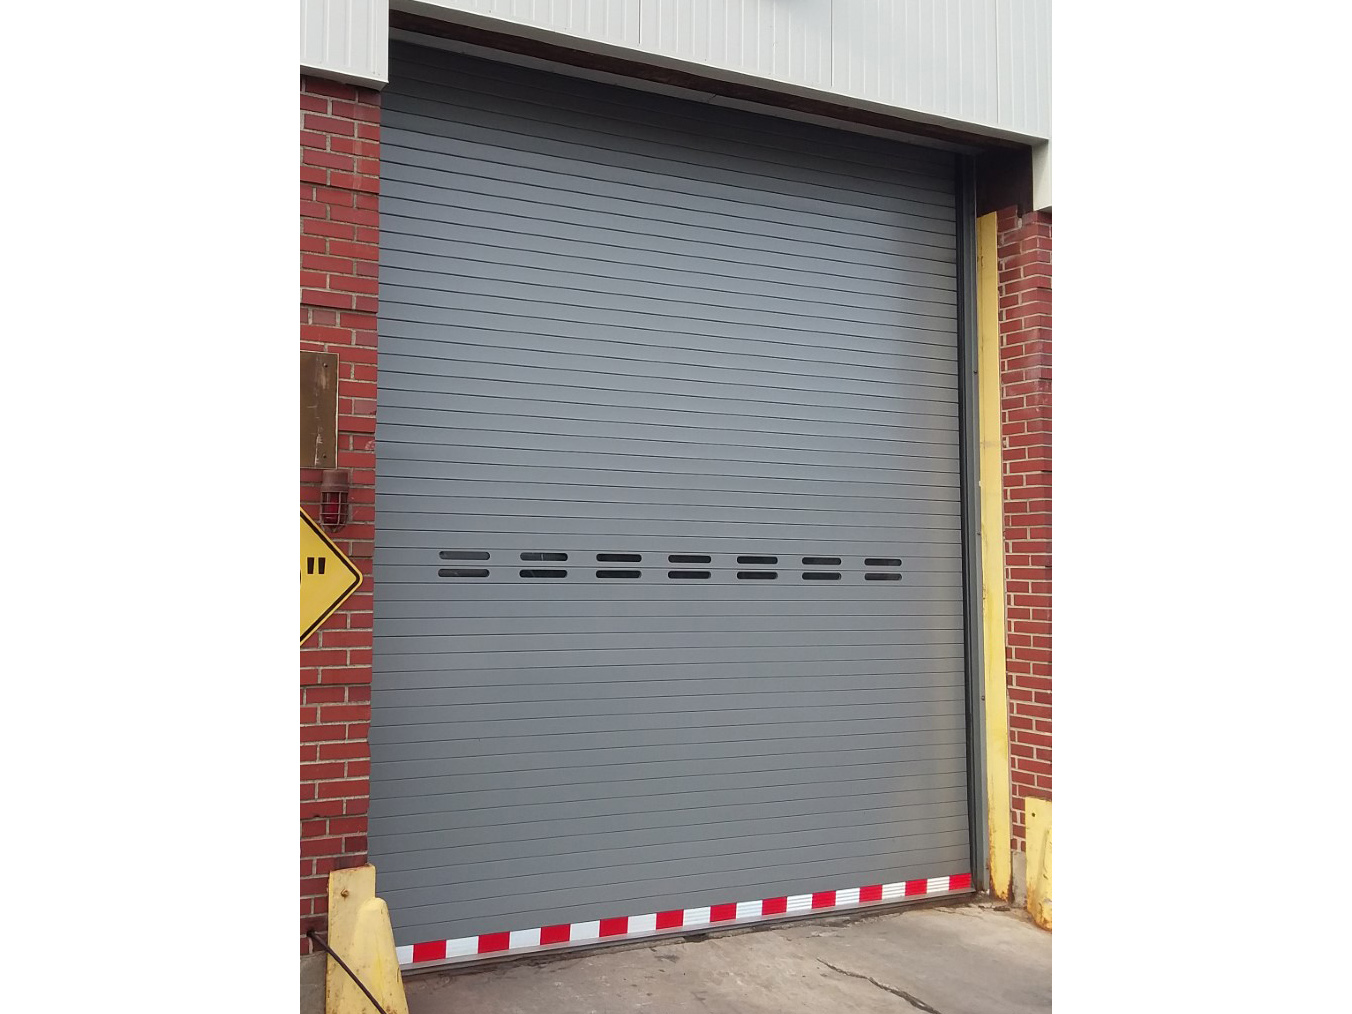 Punched slat rolling door - coned_middletown